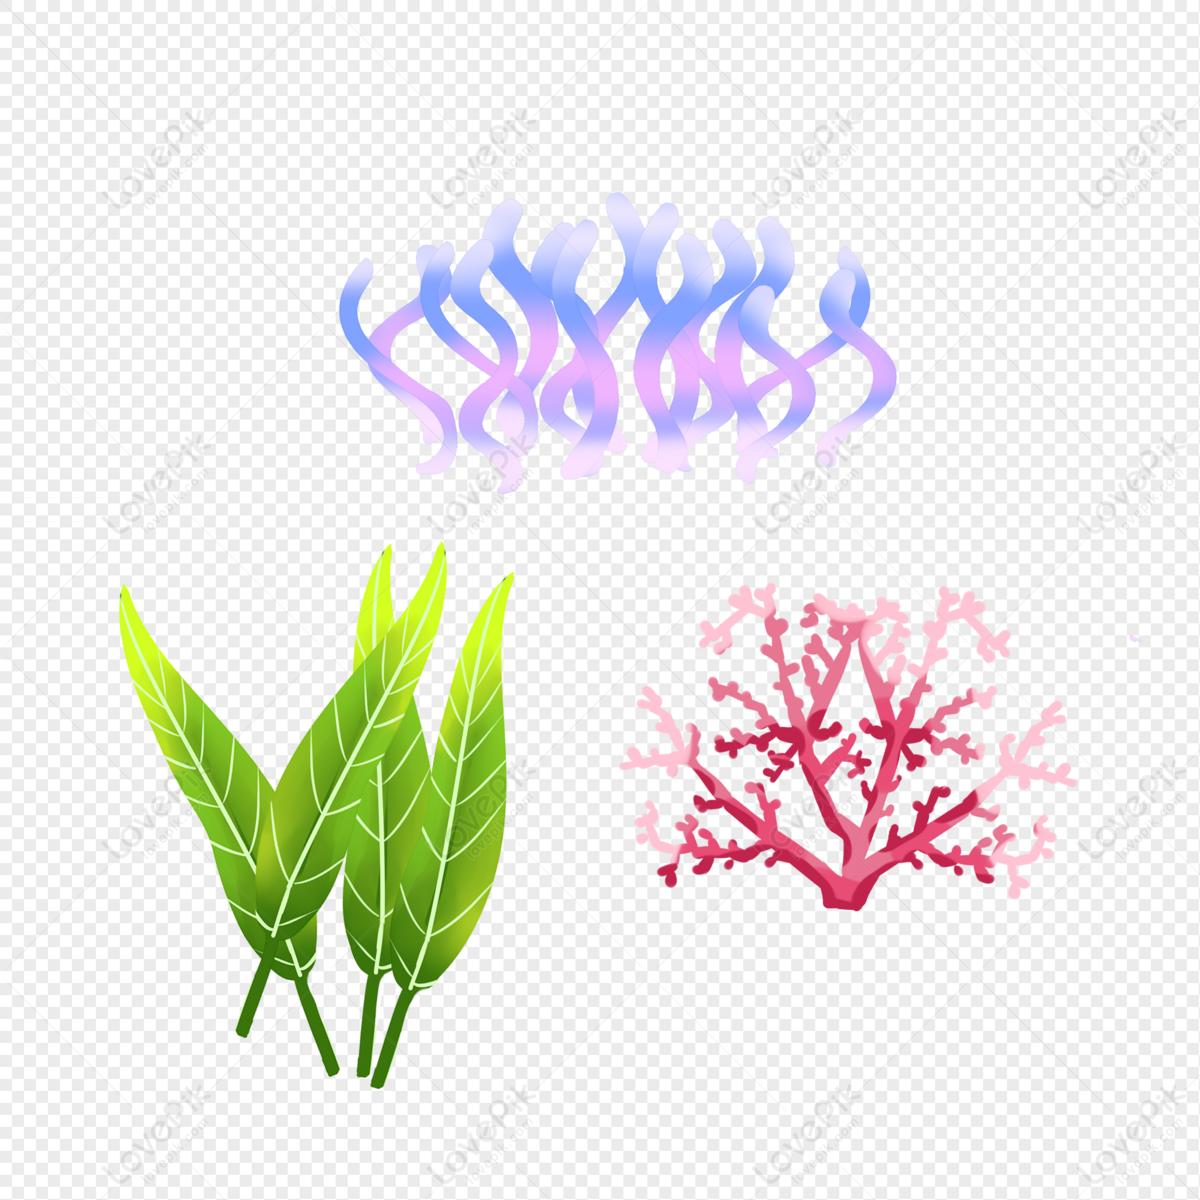 Seaweed Cartoon Hand Drawn Free PNG And Clipart Image For Free ...